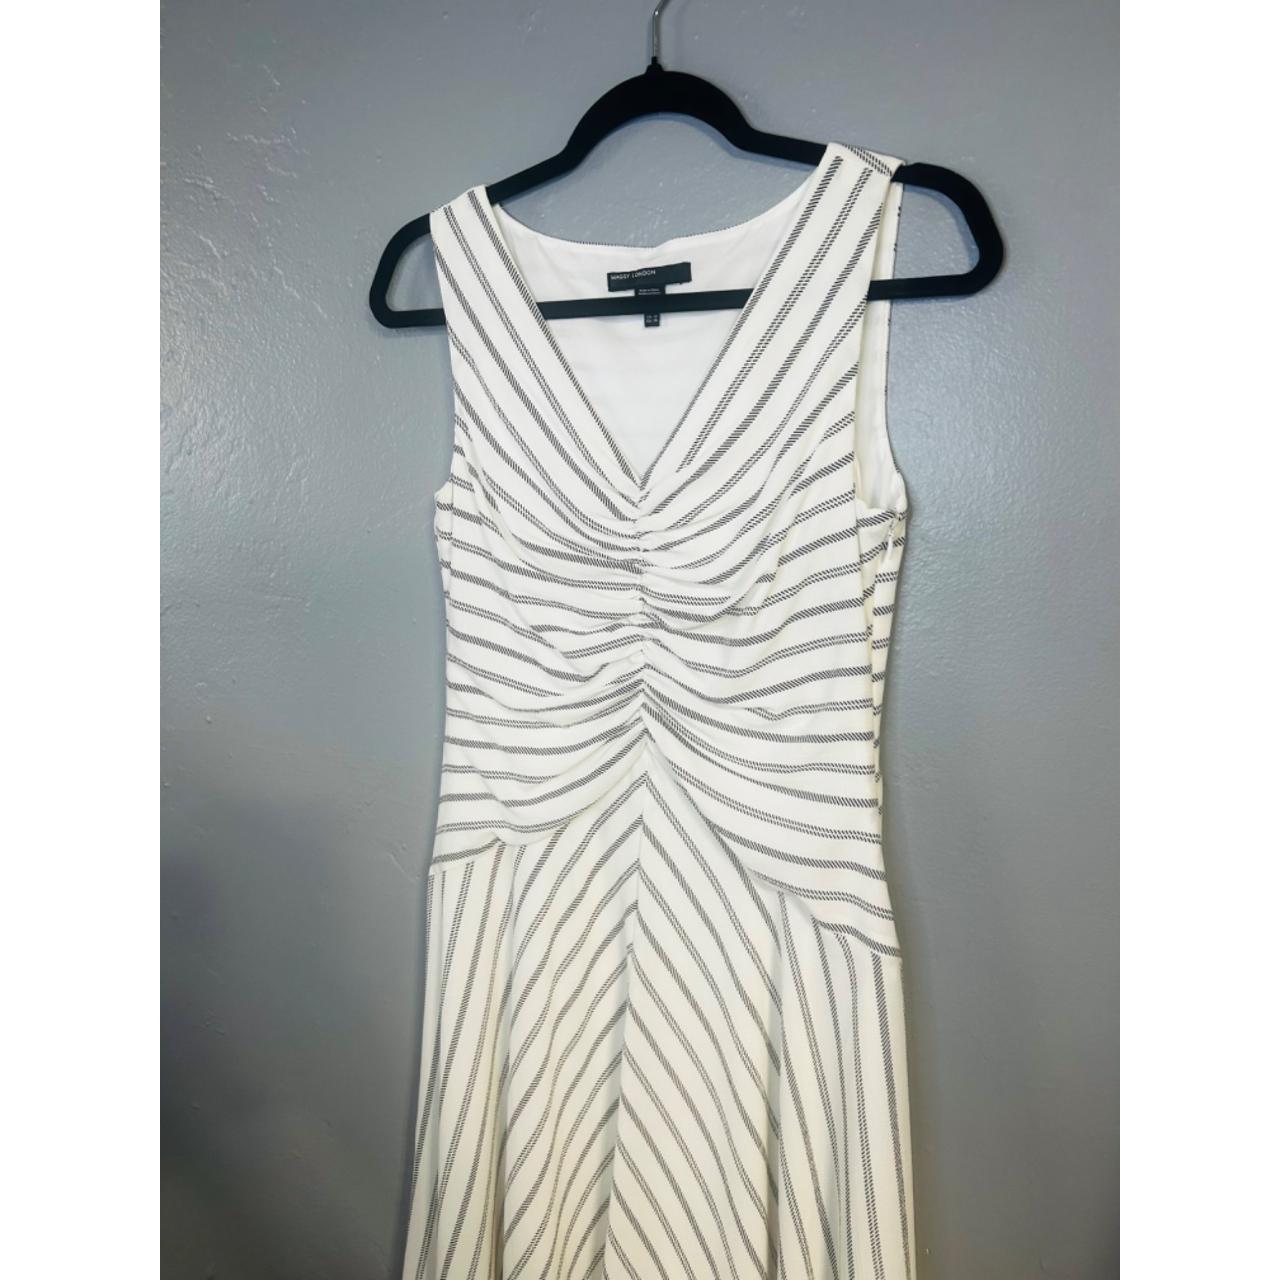 Maggy London Stripped Dress size 6 Perfecto... - Depop